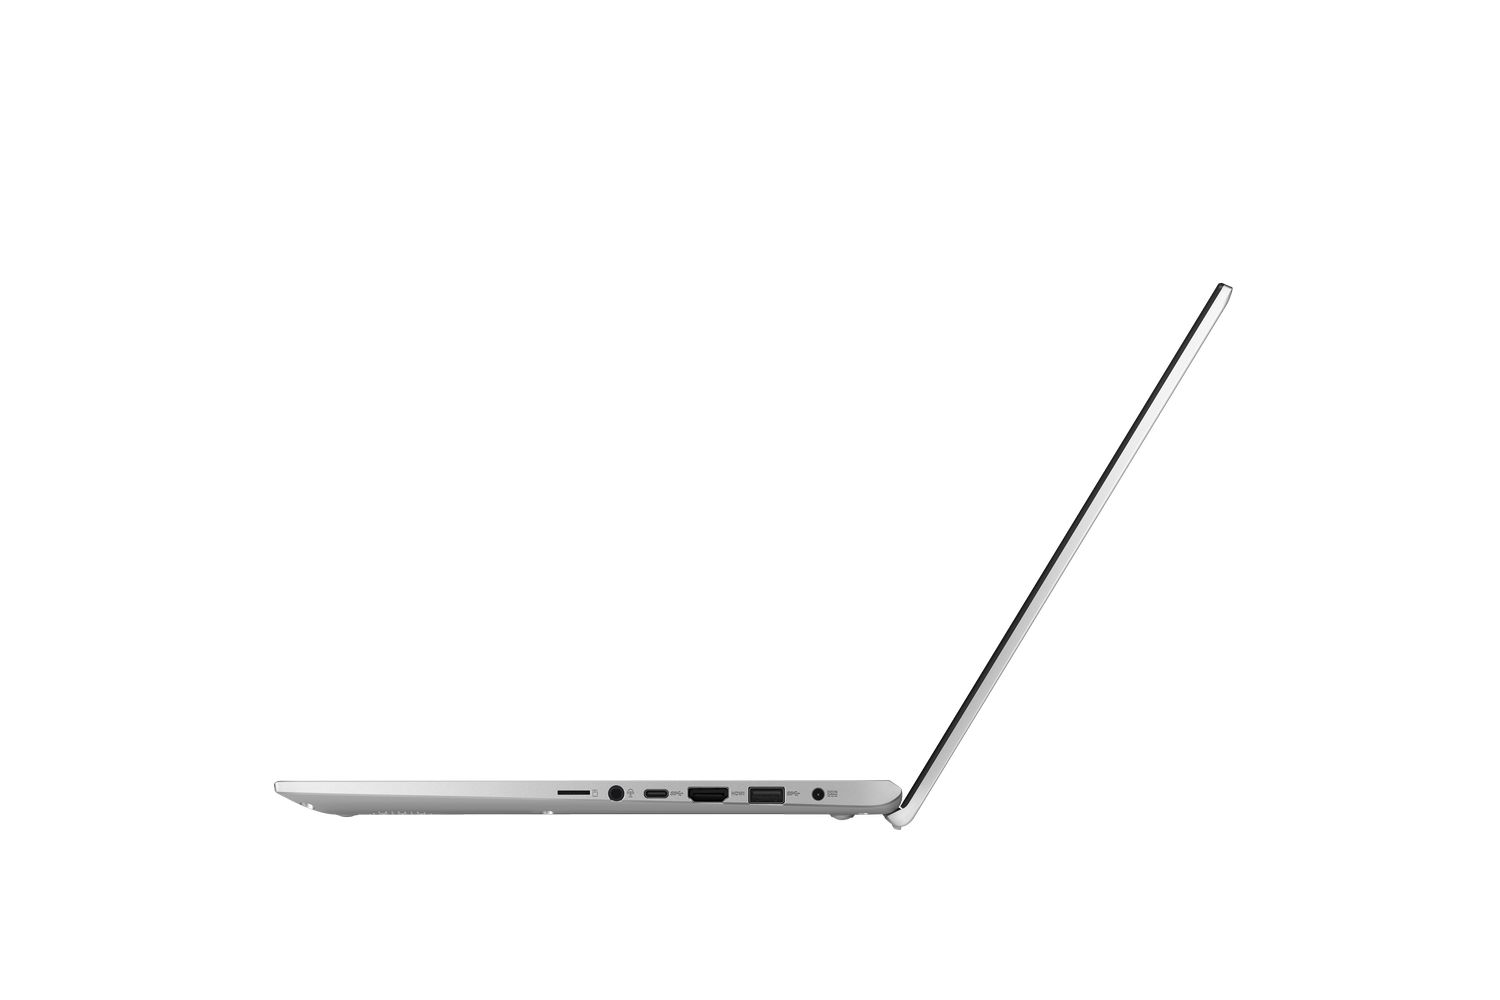 asus introduces zenbook s13 with thinnest bezels ces 2019 vivobook 14 15 ergolift hinge for a comfortable typing position